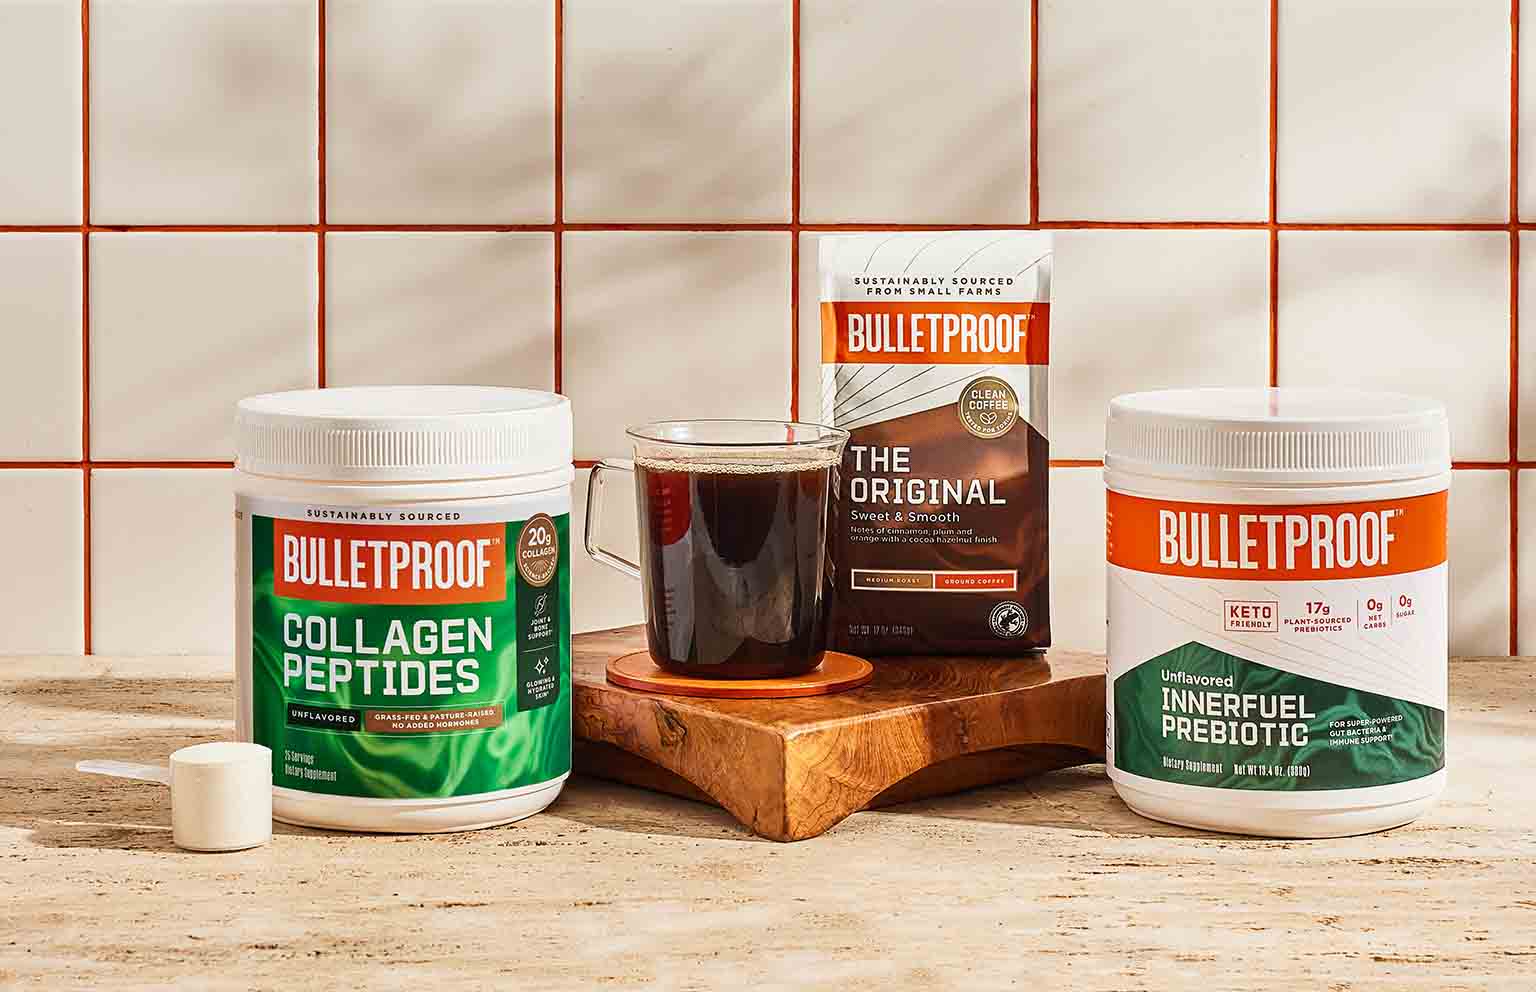 Bulletproof products